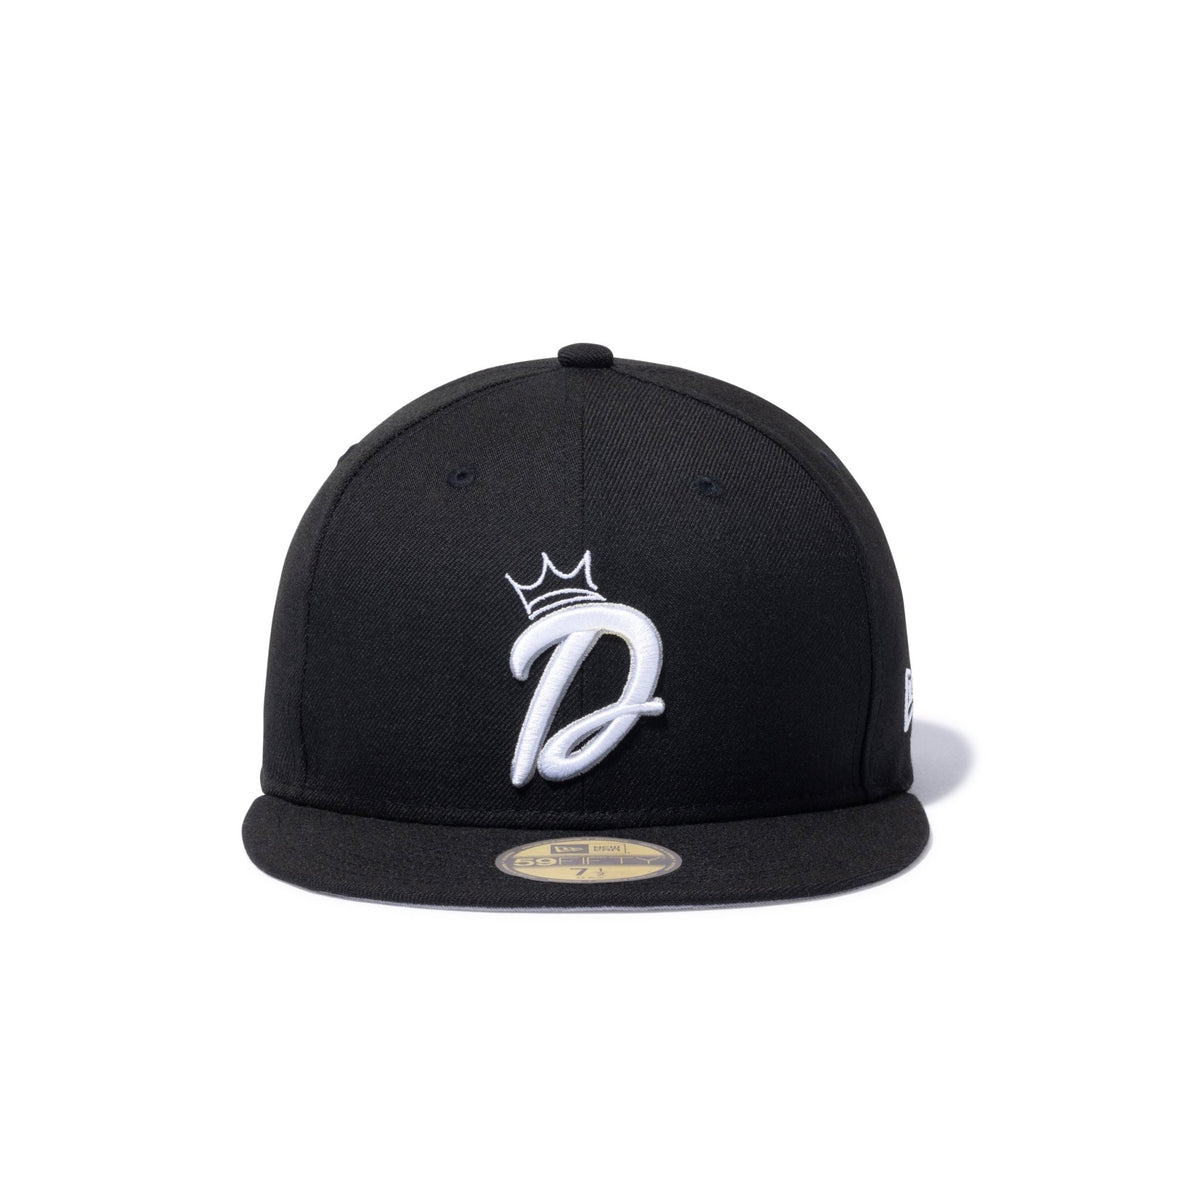 59FIFTY Dogear Records Dロゴ ネイビー